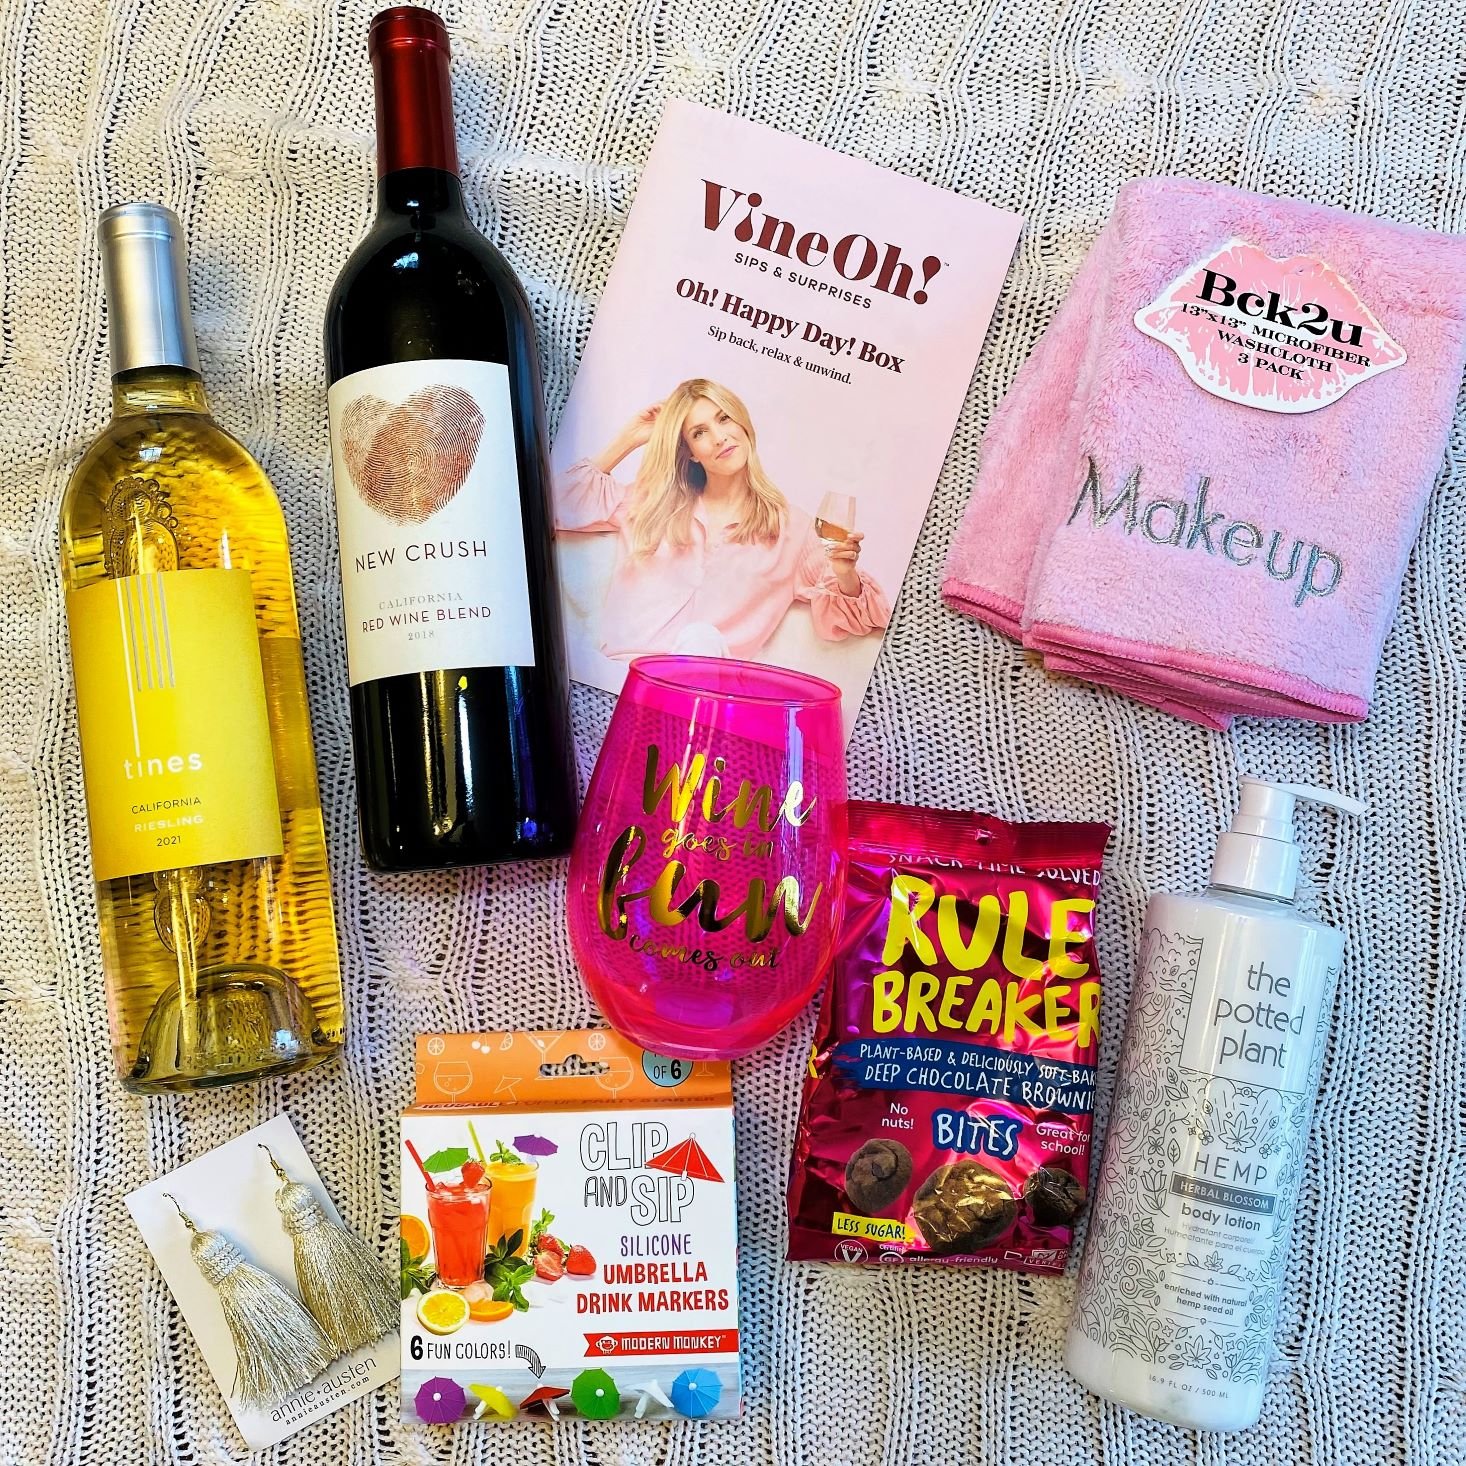 Vine Oh! “Oh! Happy Day!” Box Review + Coupon